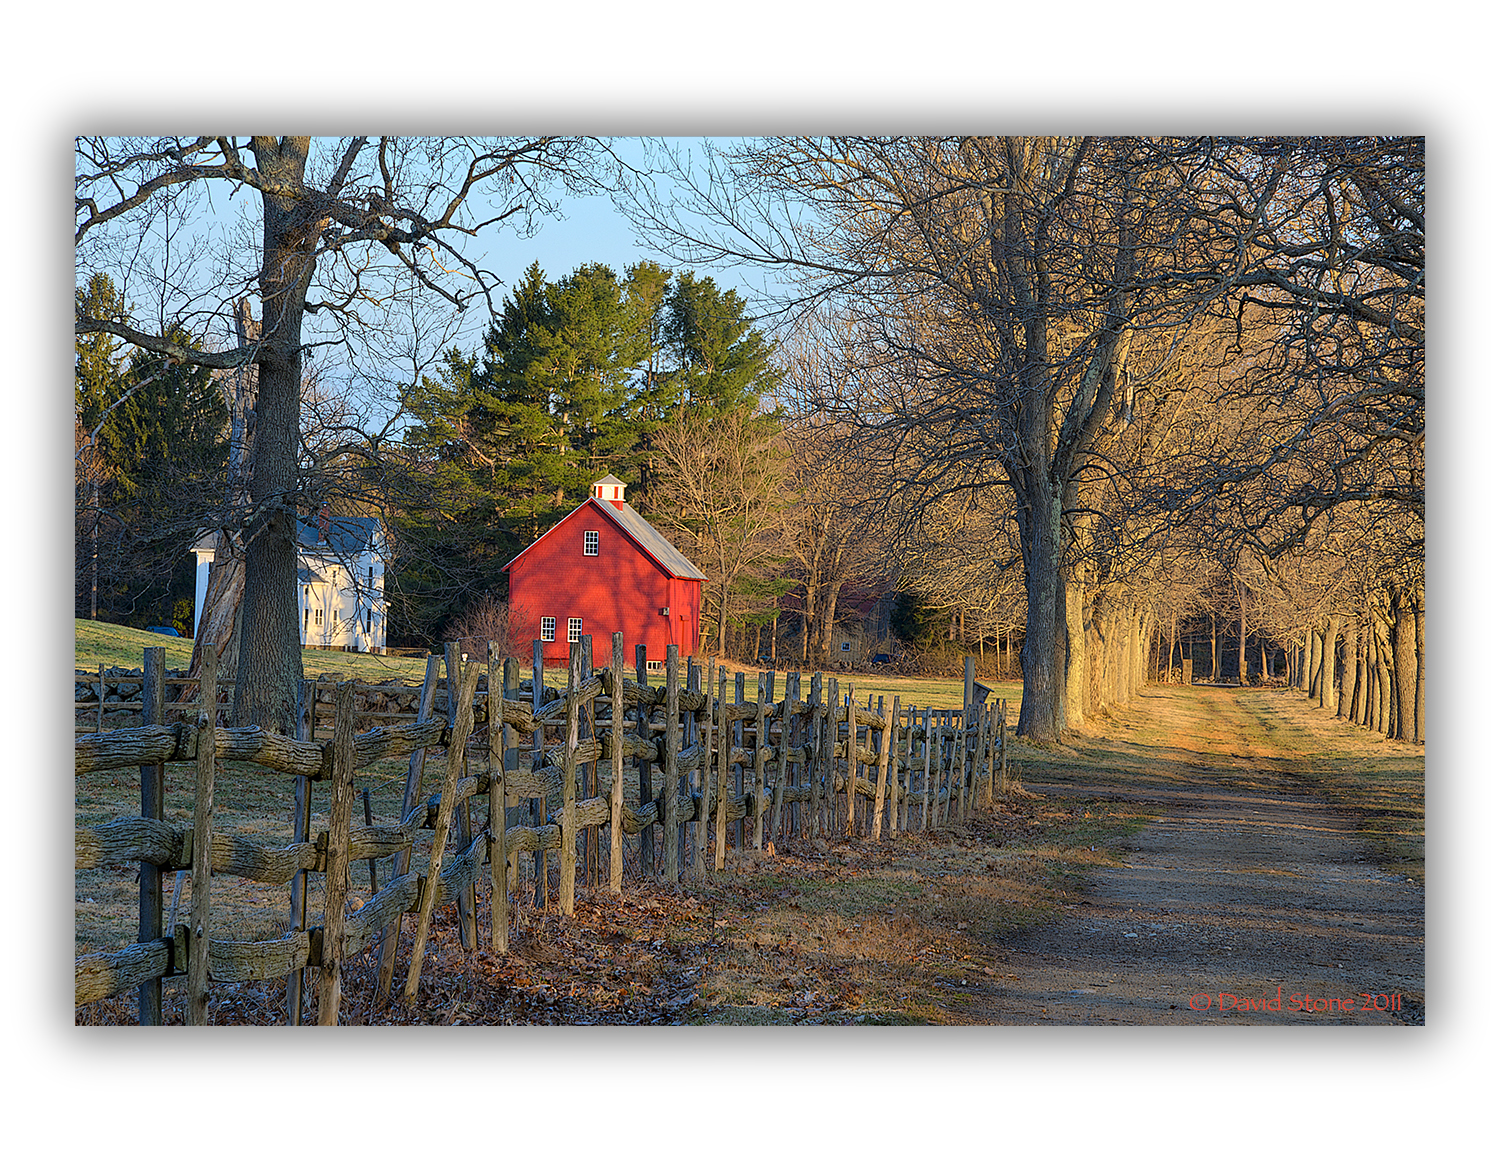 The Red Barn In April At Appleton Farm (user submitted)